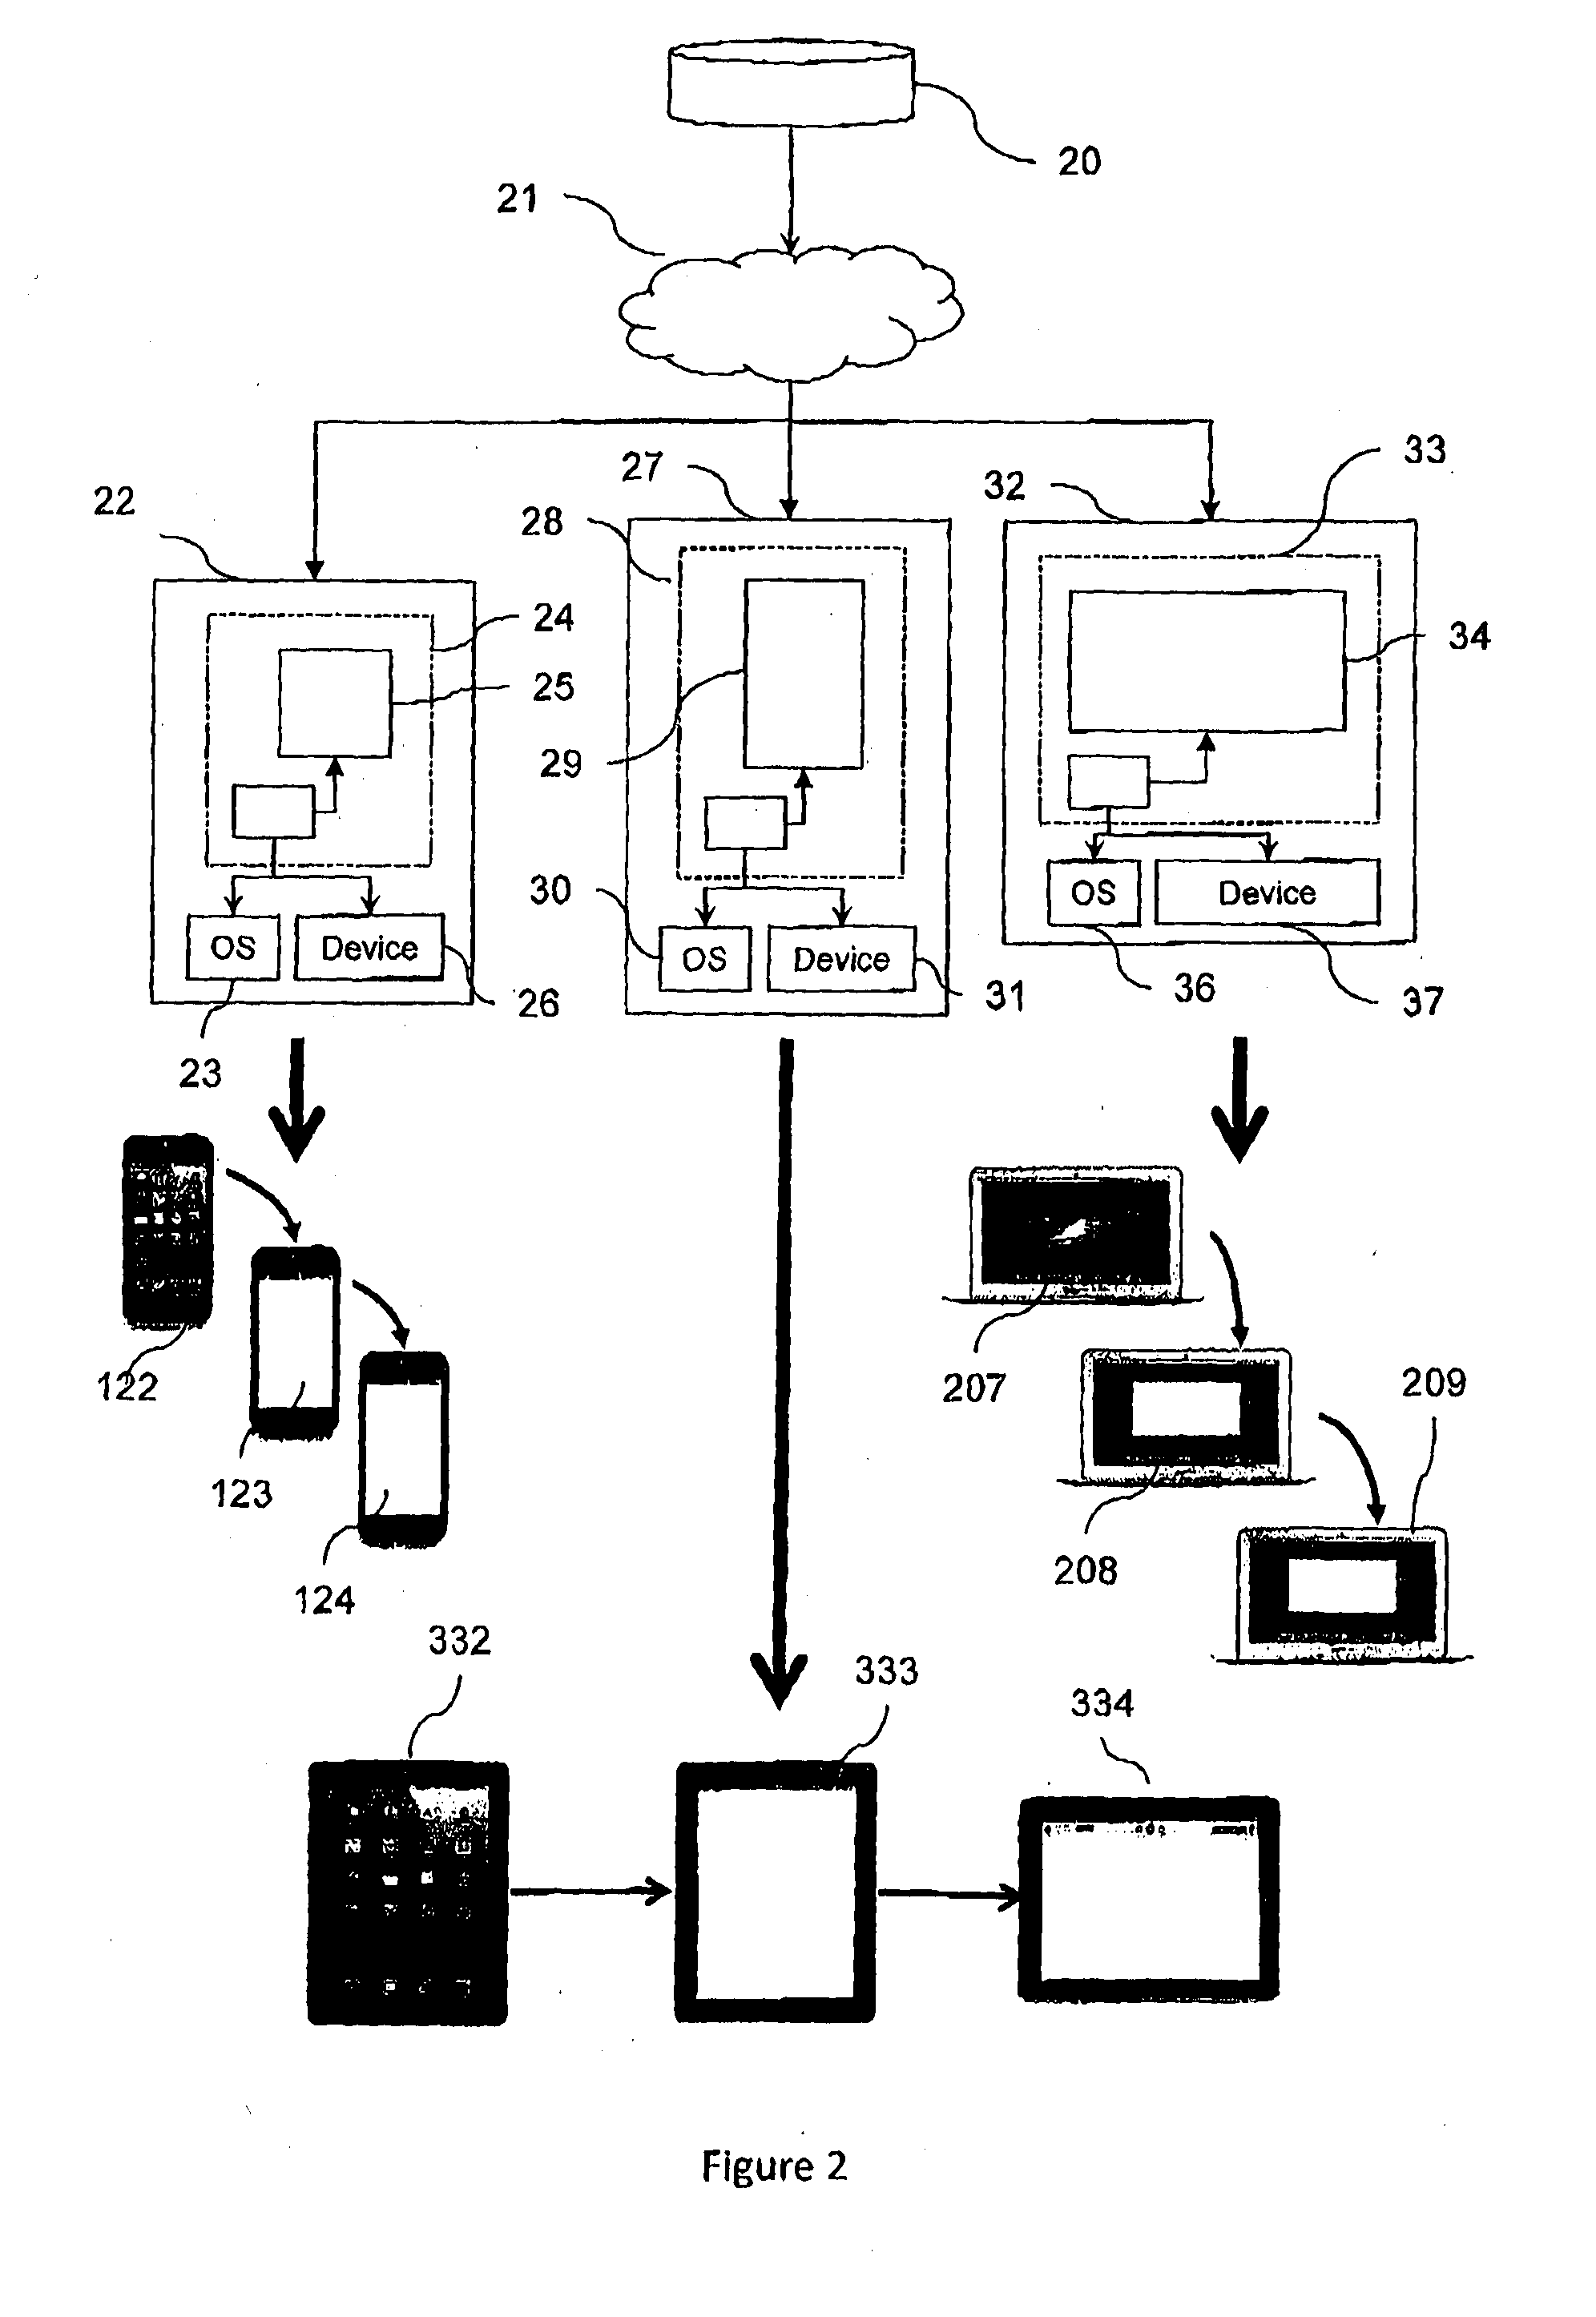 Method and System of Application Development for Multiple Device Client Platforms